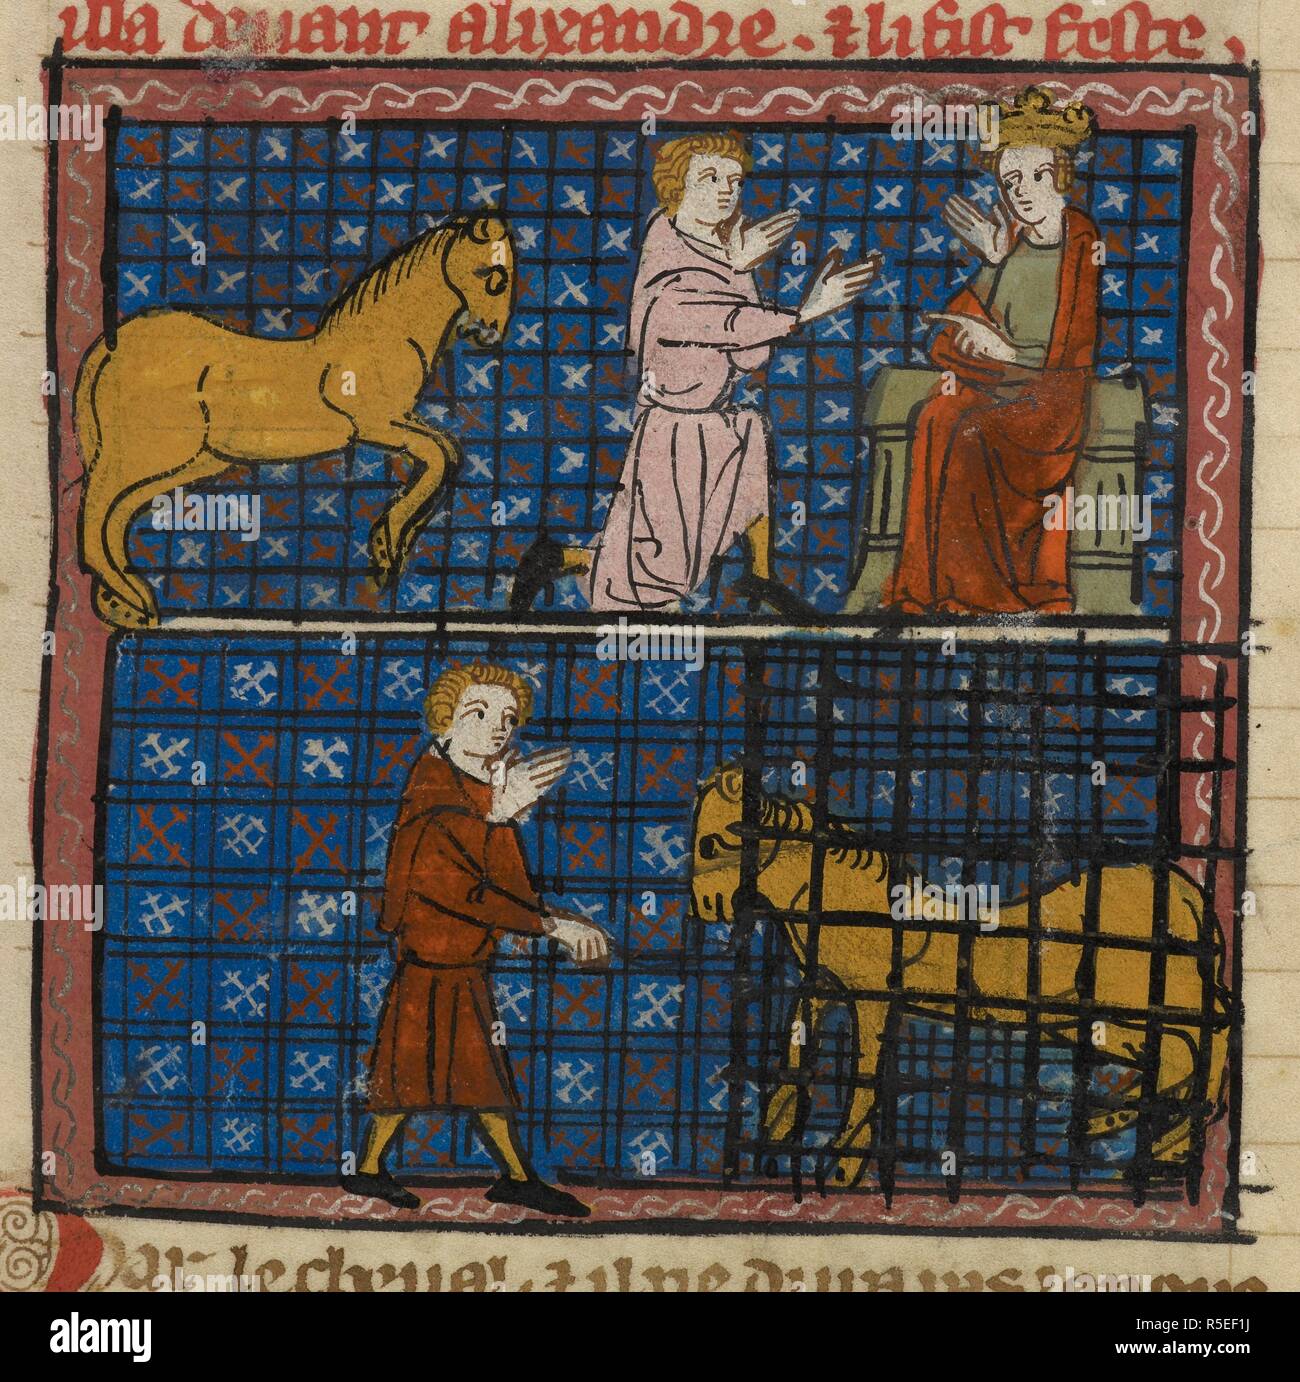 Bucephalus, the horse, and a subject kneeling to Alexander;  A servant tends to the Bucephalus in a cage. Historia de proeliis, or, La vraie ystoire dou bon roi Alixandre, and other romances. France, Central (Paris). 2nd quarter of the 14th century, after 1333. Alexander the Great, and his famous horse, Bucephalus. Source: Royal 19 D. I f.6. Language: French. Stock Photo